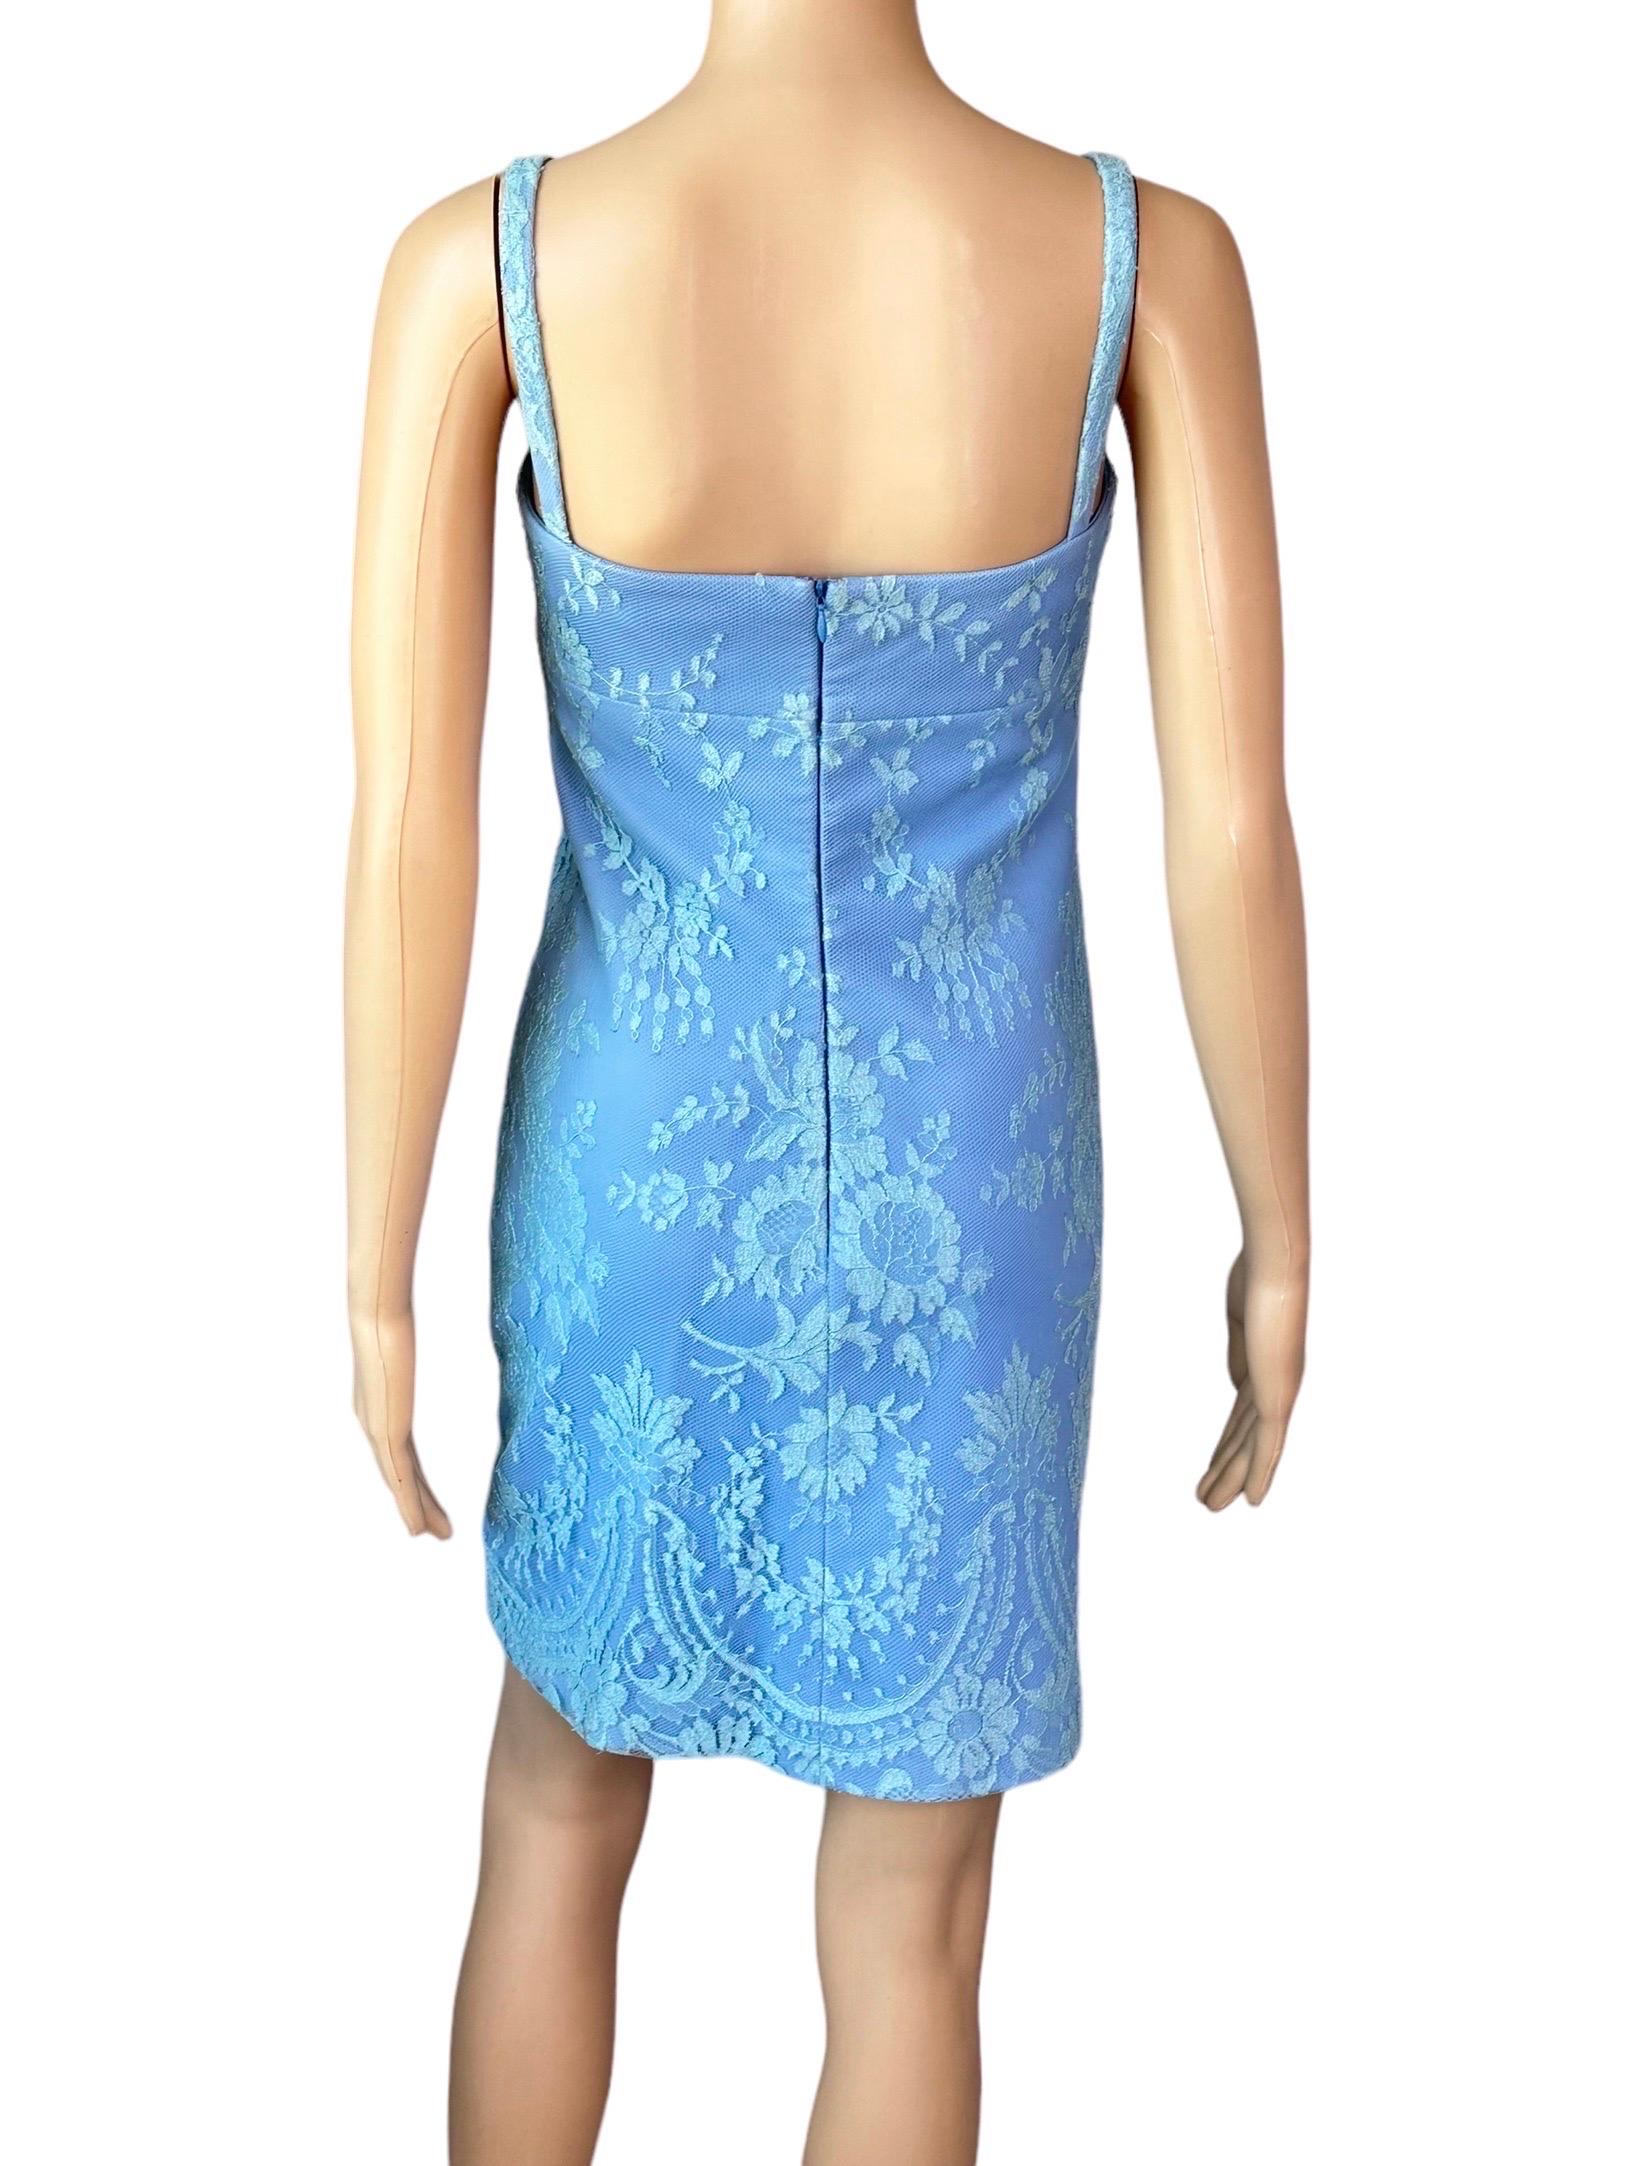 Women's Gianni Versace F/W 1996 Vintage Floral Lace and Leather Blue Mini Dress 